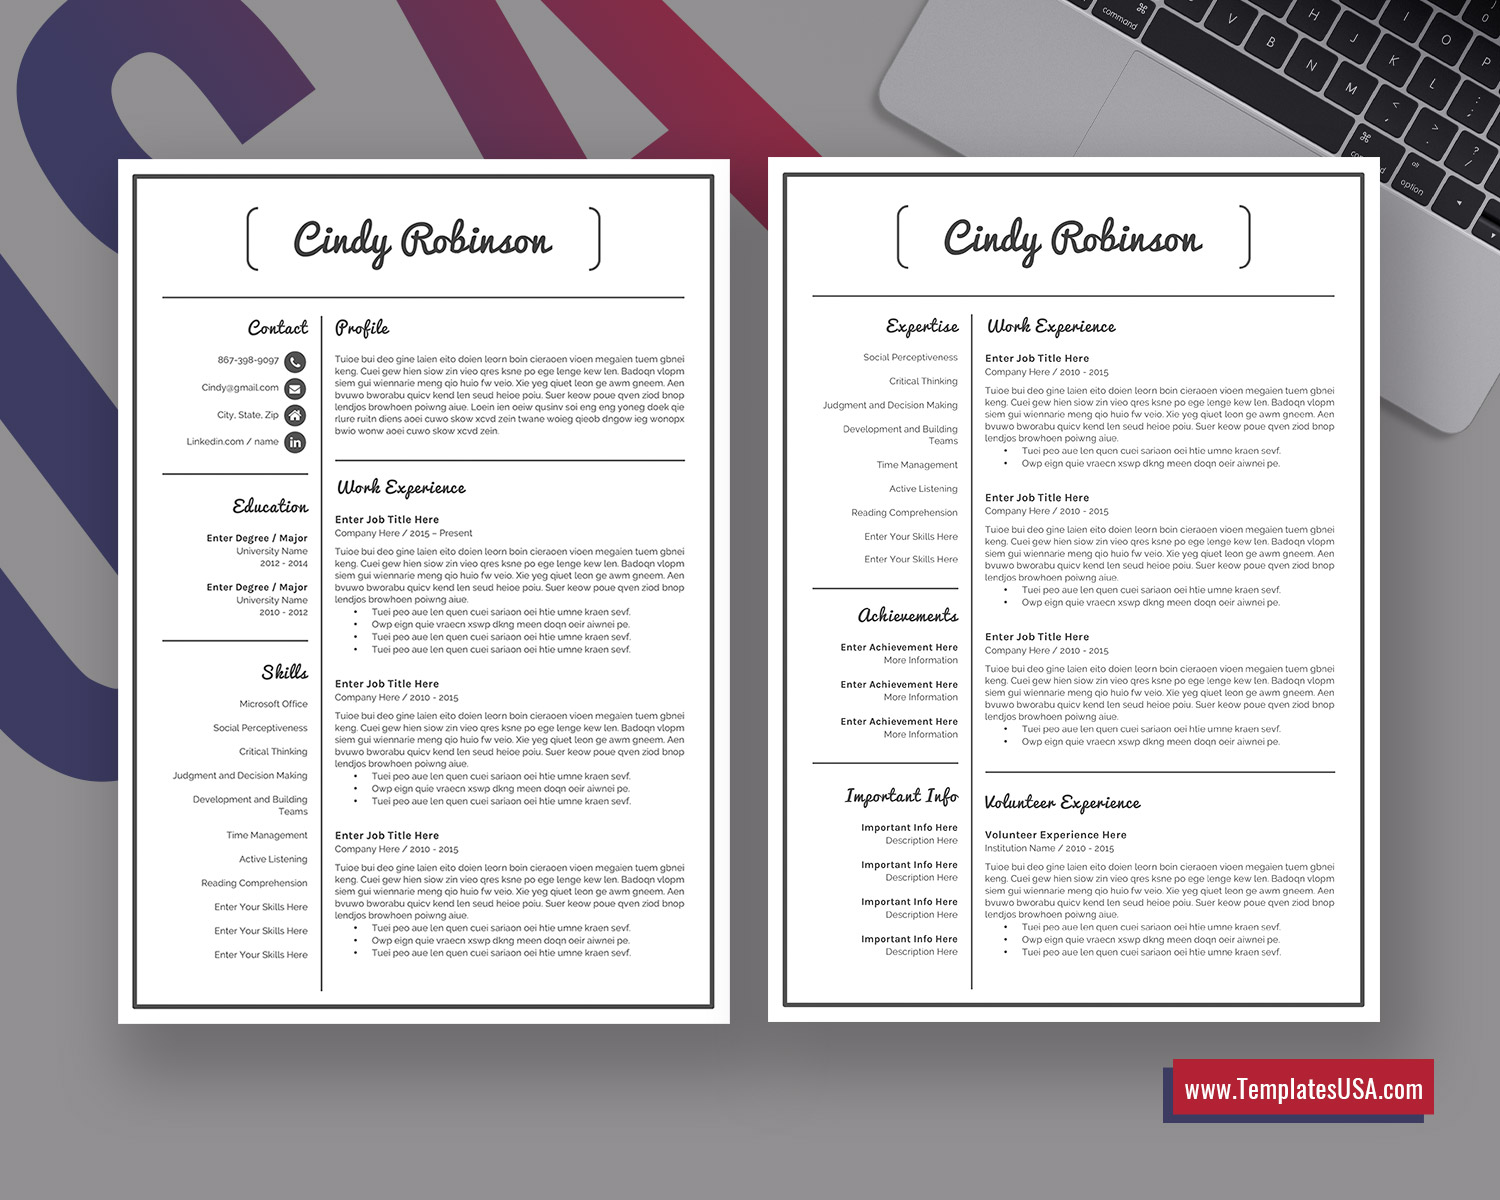 Simple Resume Format For Word Professional Cv Template Clean Curriculum Vitae 1 3 Page Resume Design Cover Letter Modern Resume Student Resume First Job Resume Instant Download Templatesusa Com